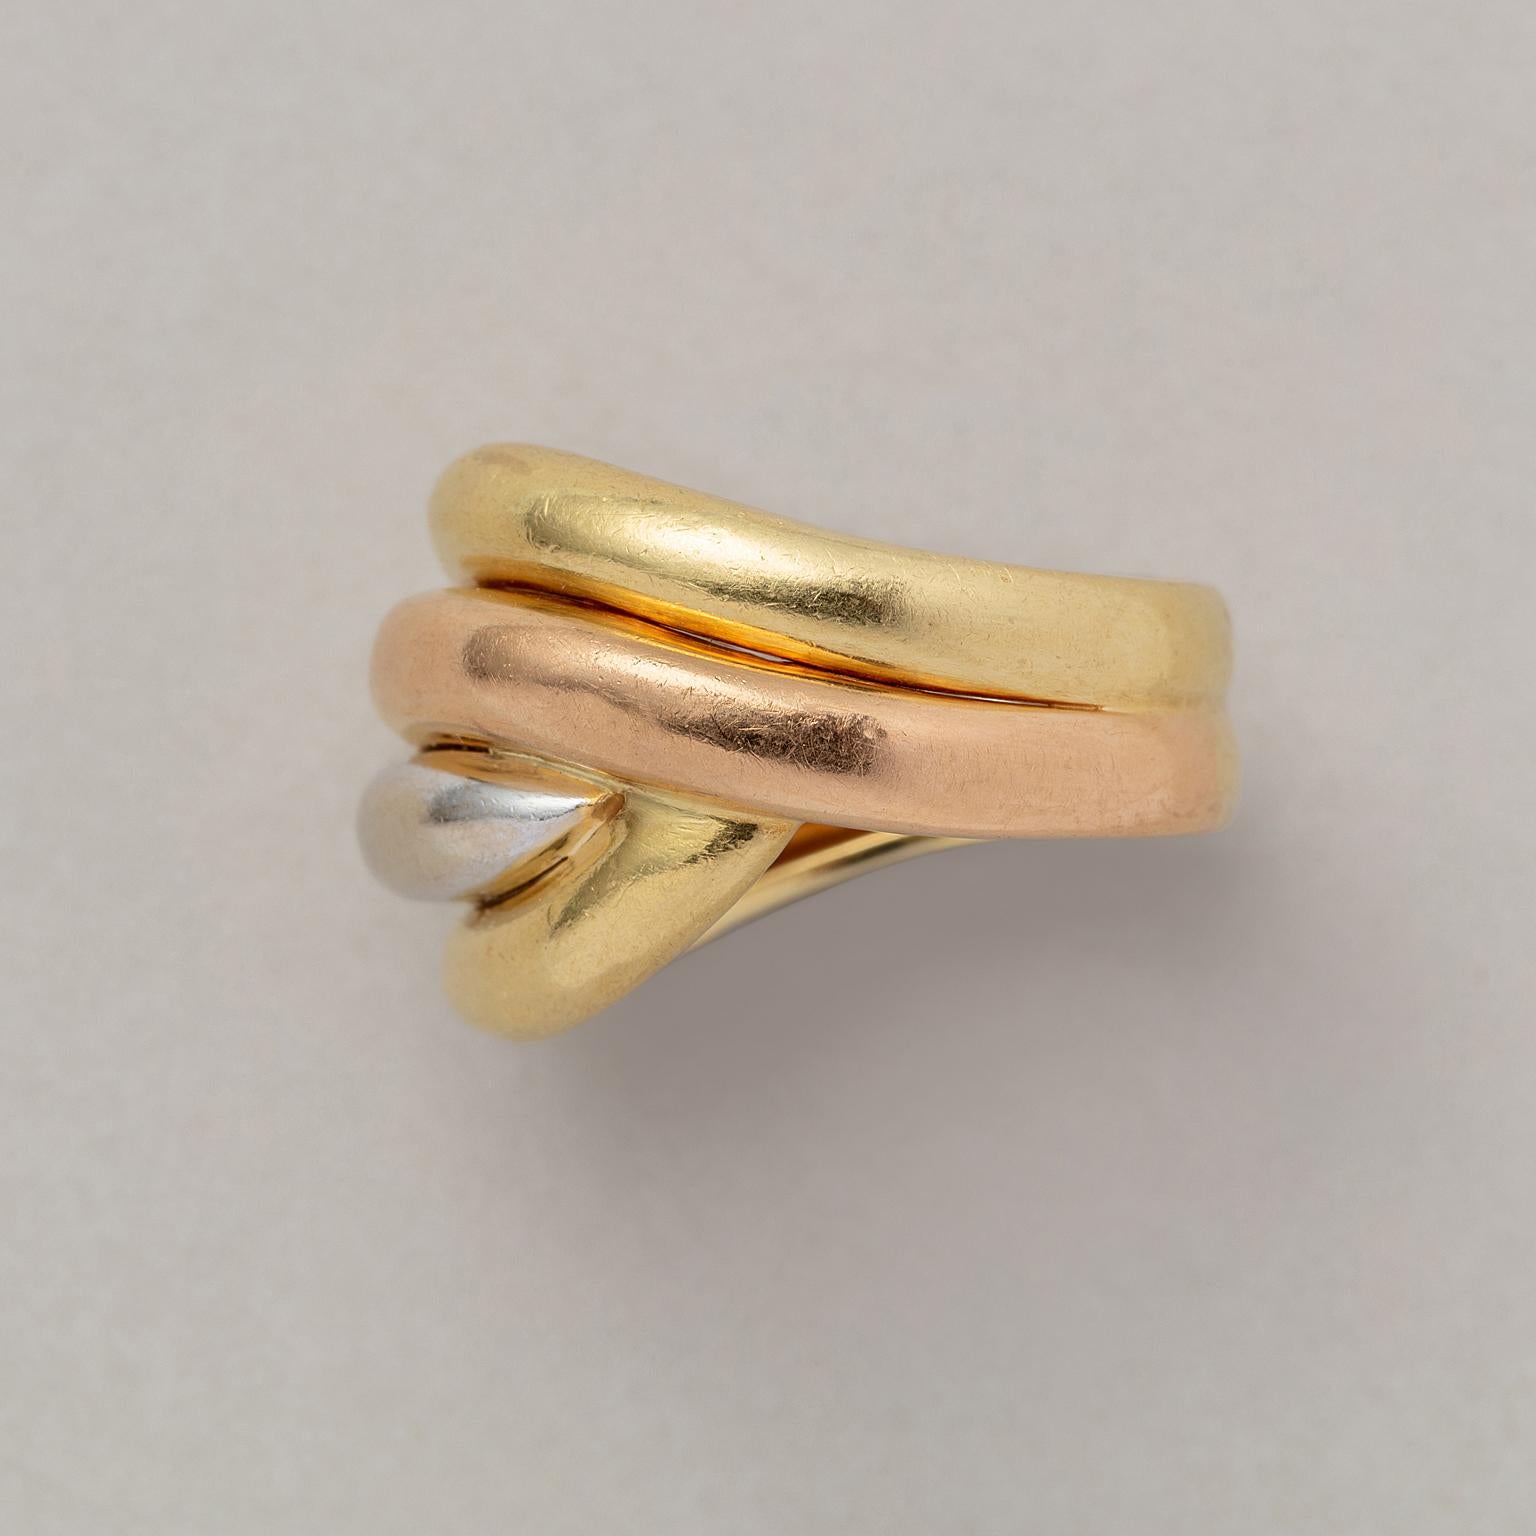 An 18 carat tri-color gold knot ring, from top to bottom: yellow,white, rose yellow, signed: Fred, Paris
weight: 9.62 grams. 
ring size: 18 mm. / 7.75 US.
width: 0.7-1.7 cm